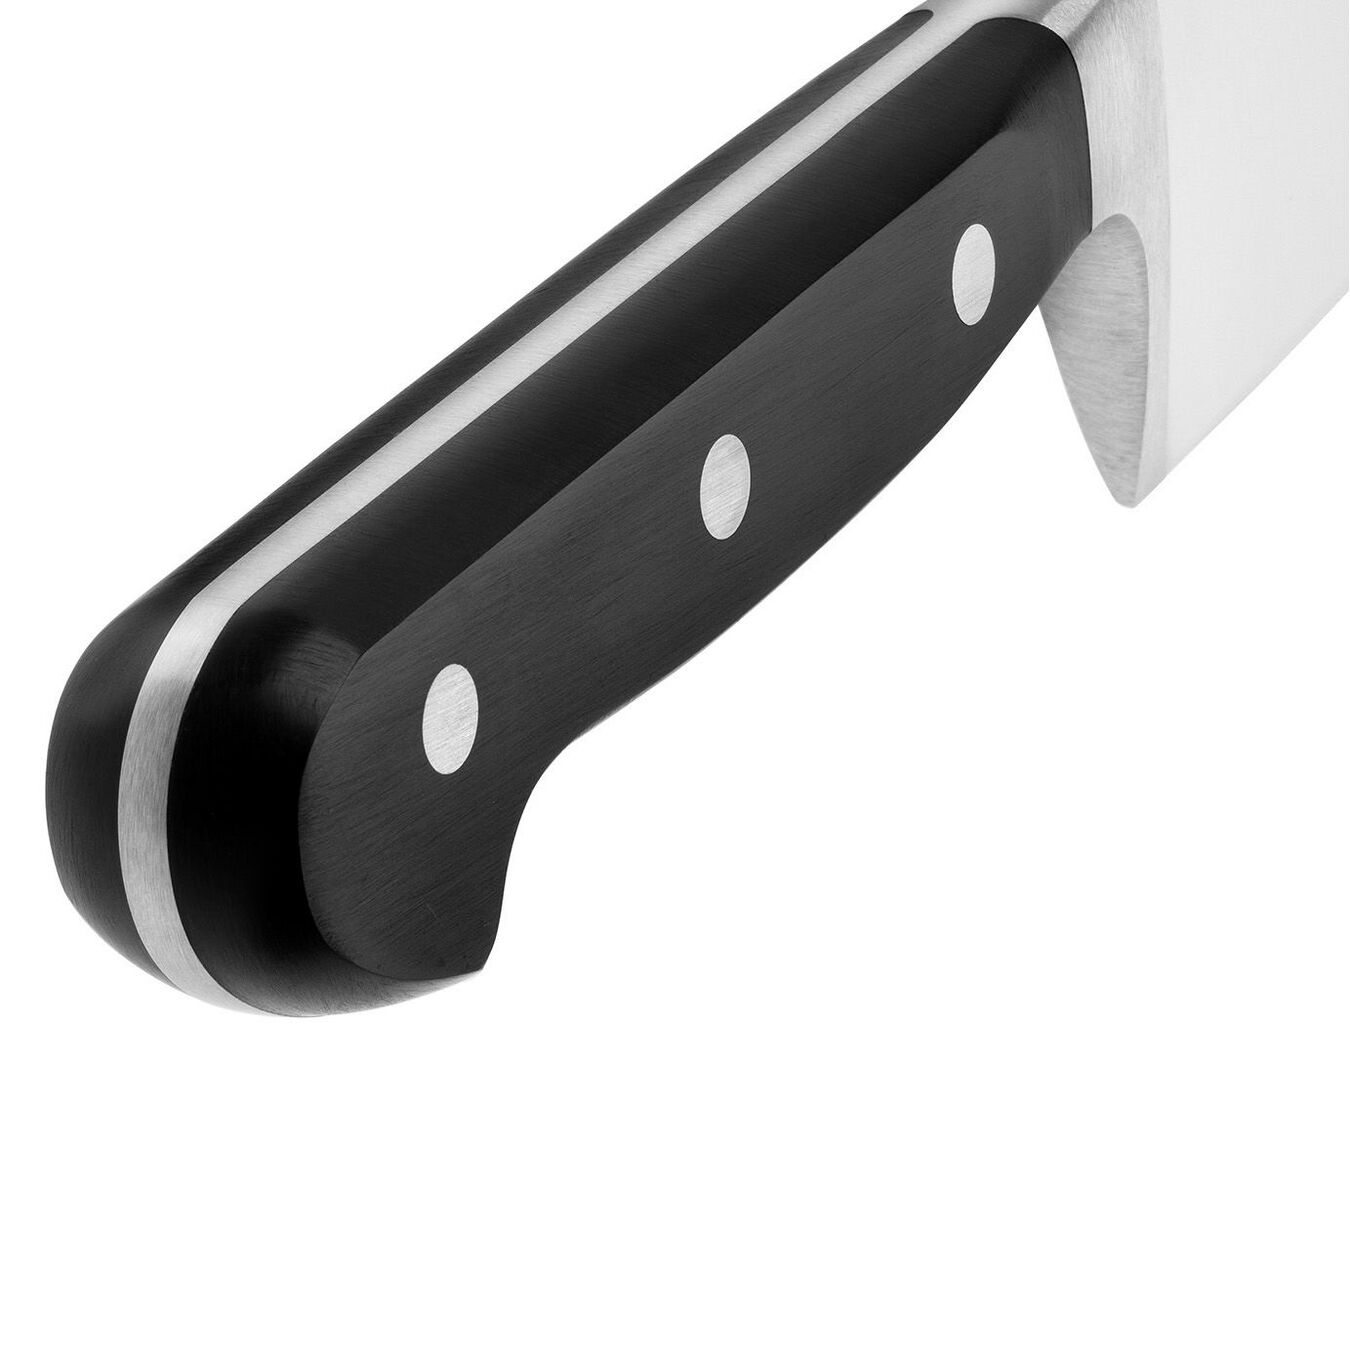 Zwilling Professional ‘S’ 3 Piece Starter Set Product Image 0